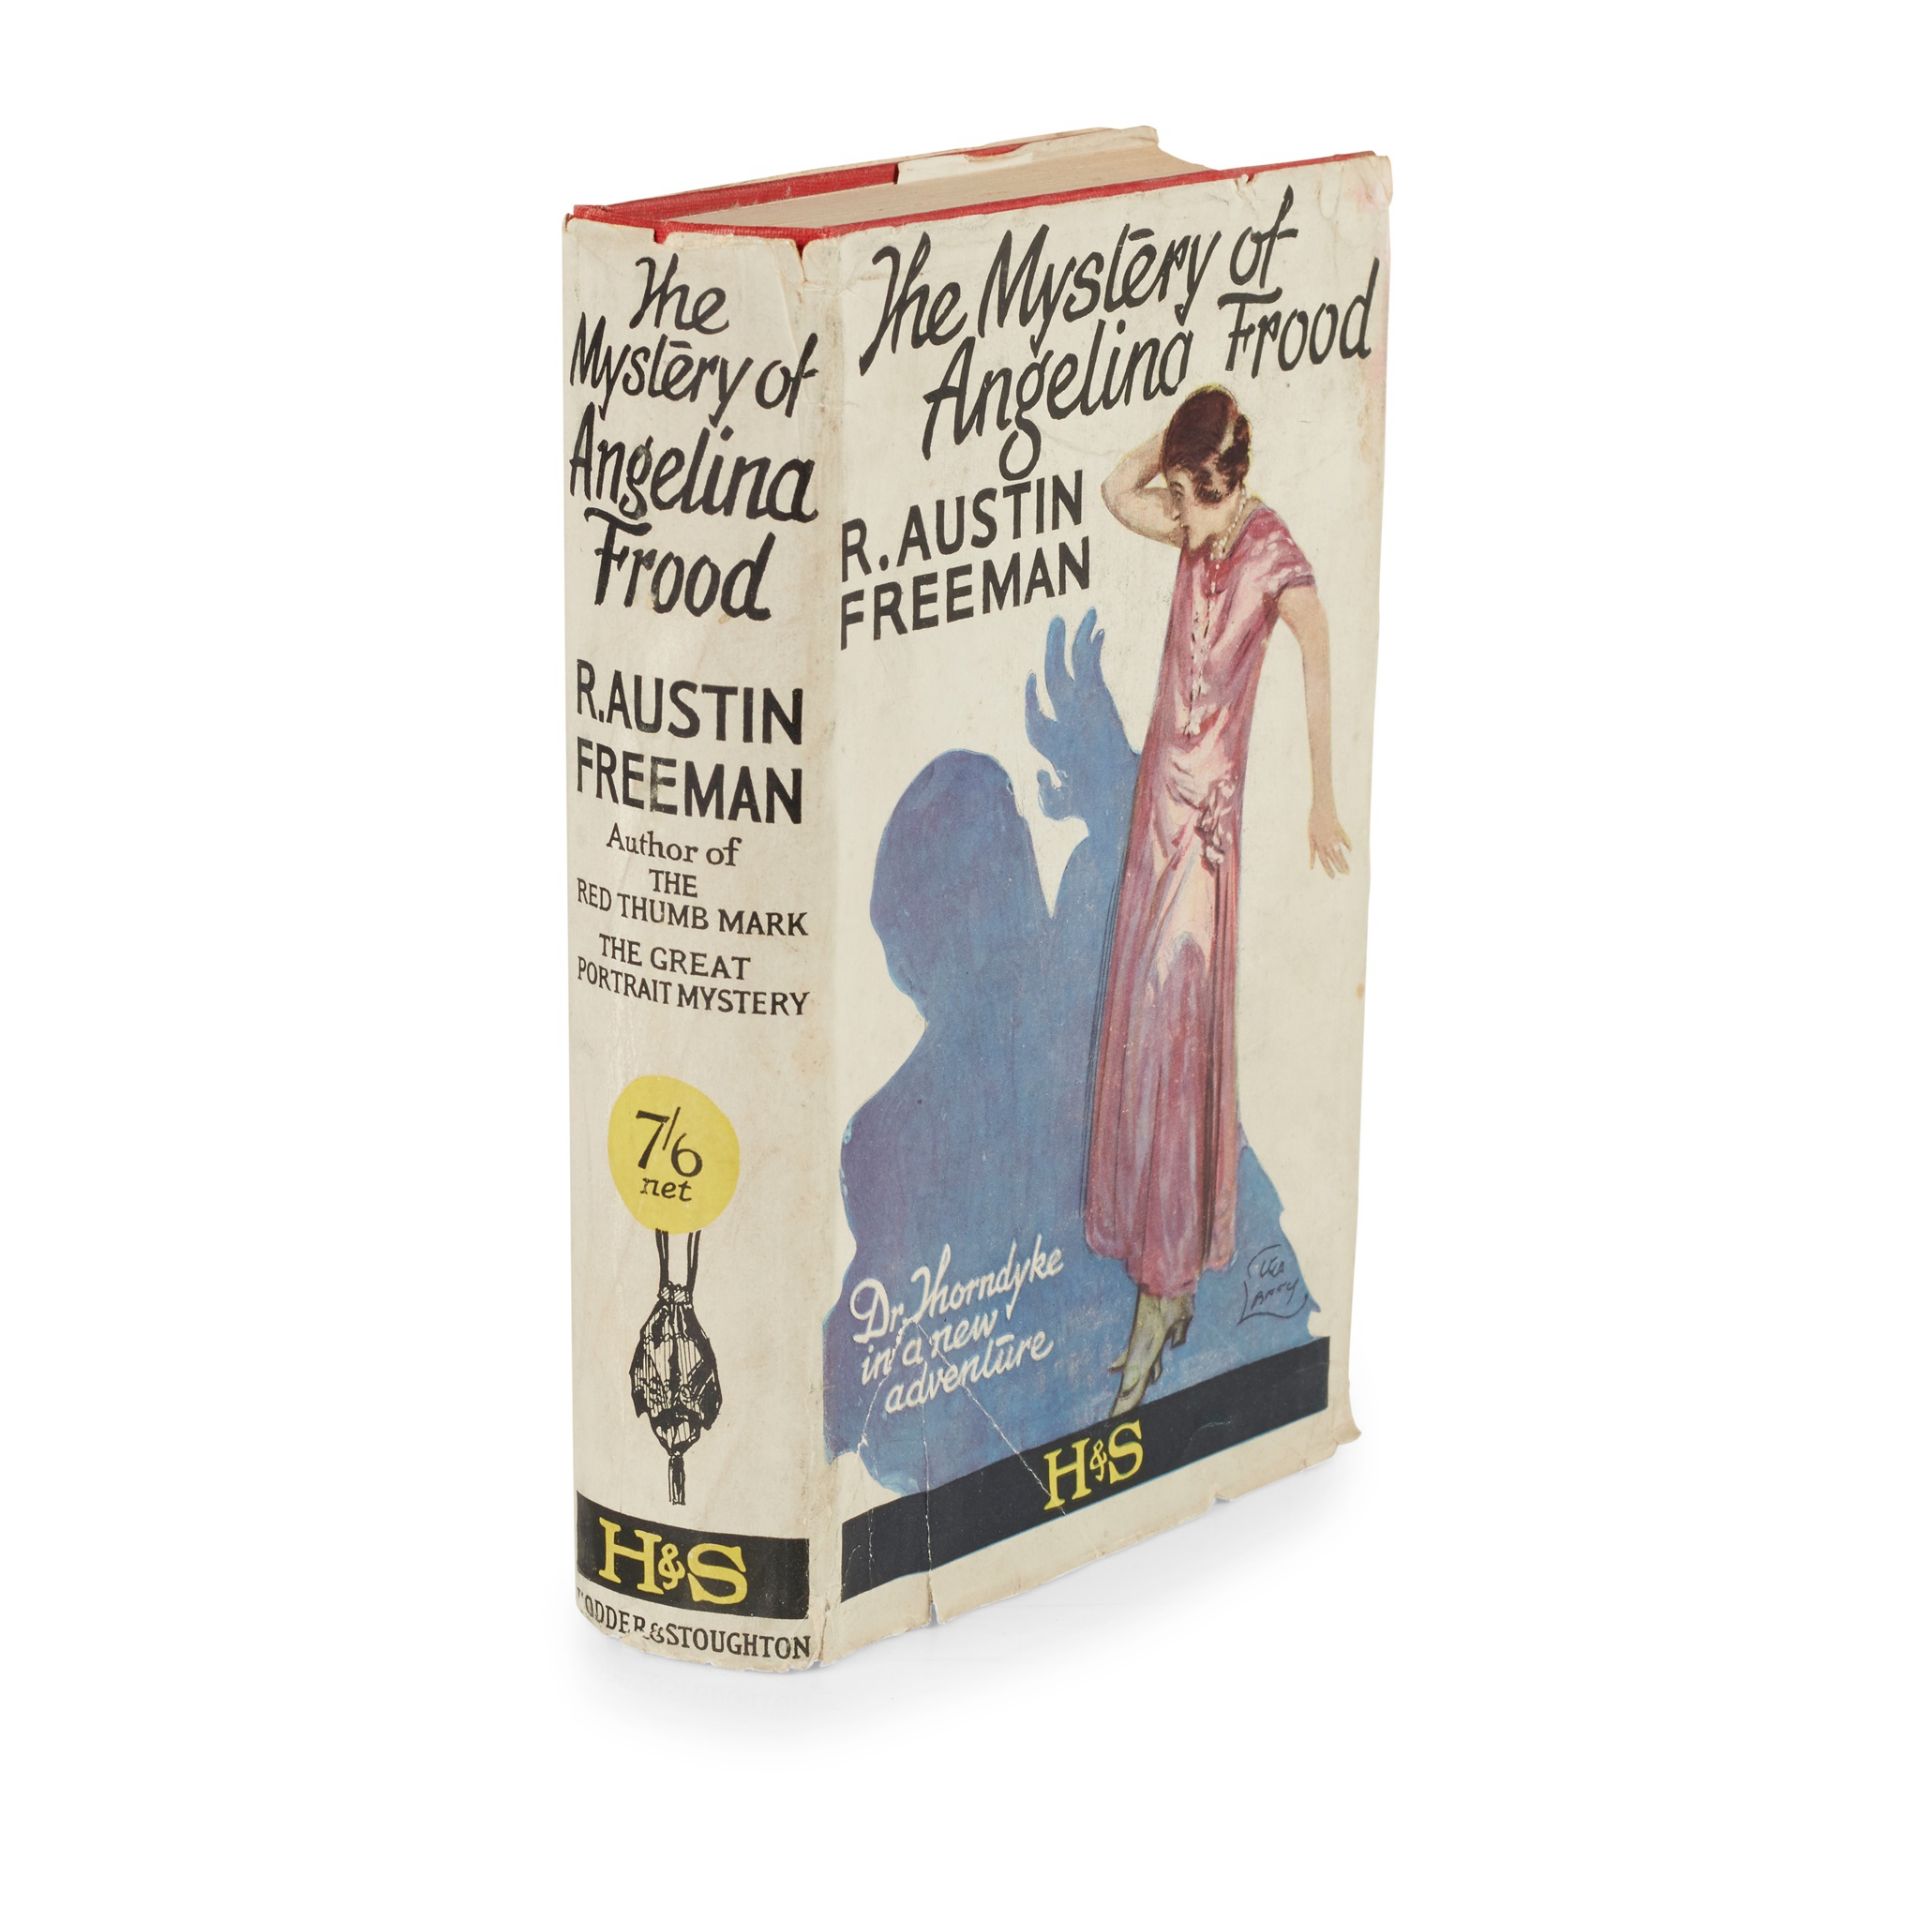 Detective Fiction - Freeman, R. Austin The Mystery of Angelina Frood